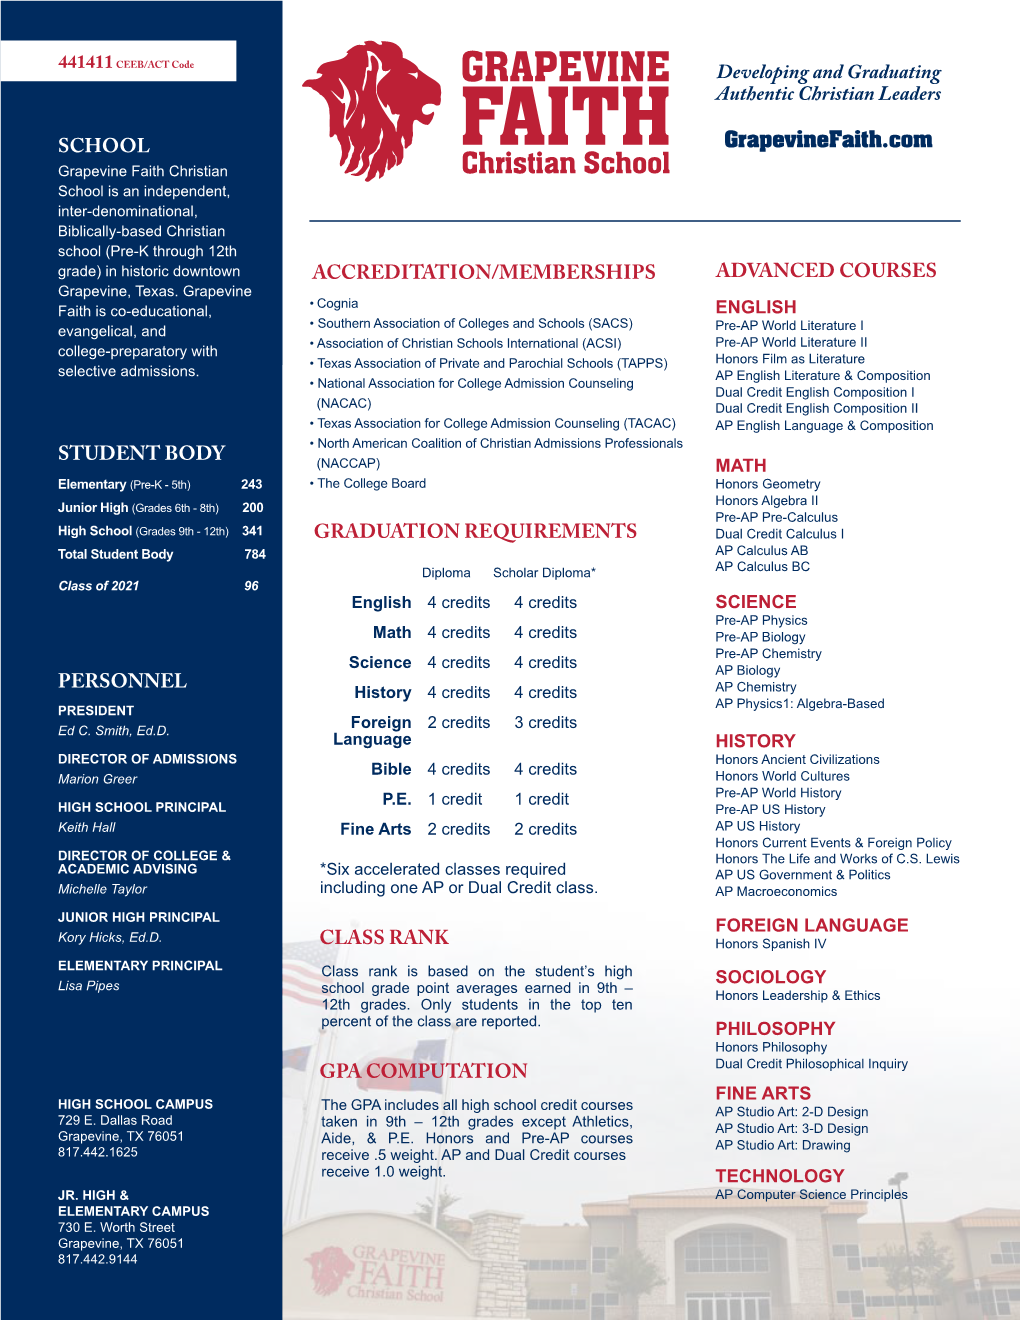 Developing and Graduating Authentic Christian Leaders SCHOOL GRADUATION REQUIREMENTS STUDENT BODY PERSONNEL ADVANCED COURSES